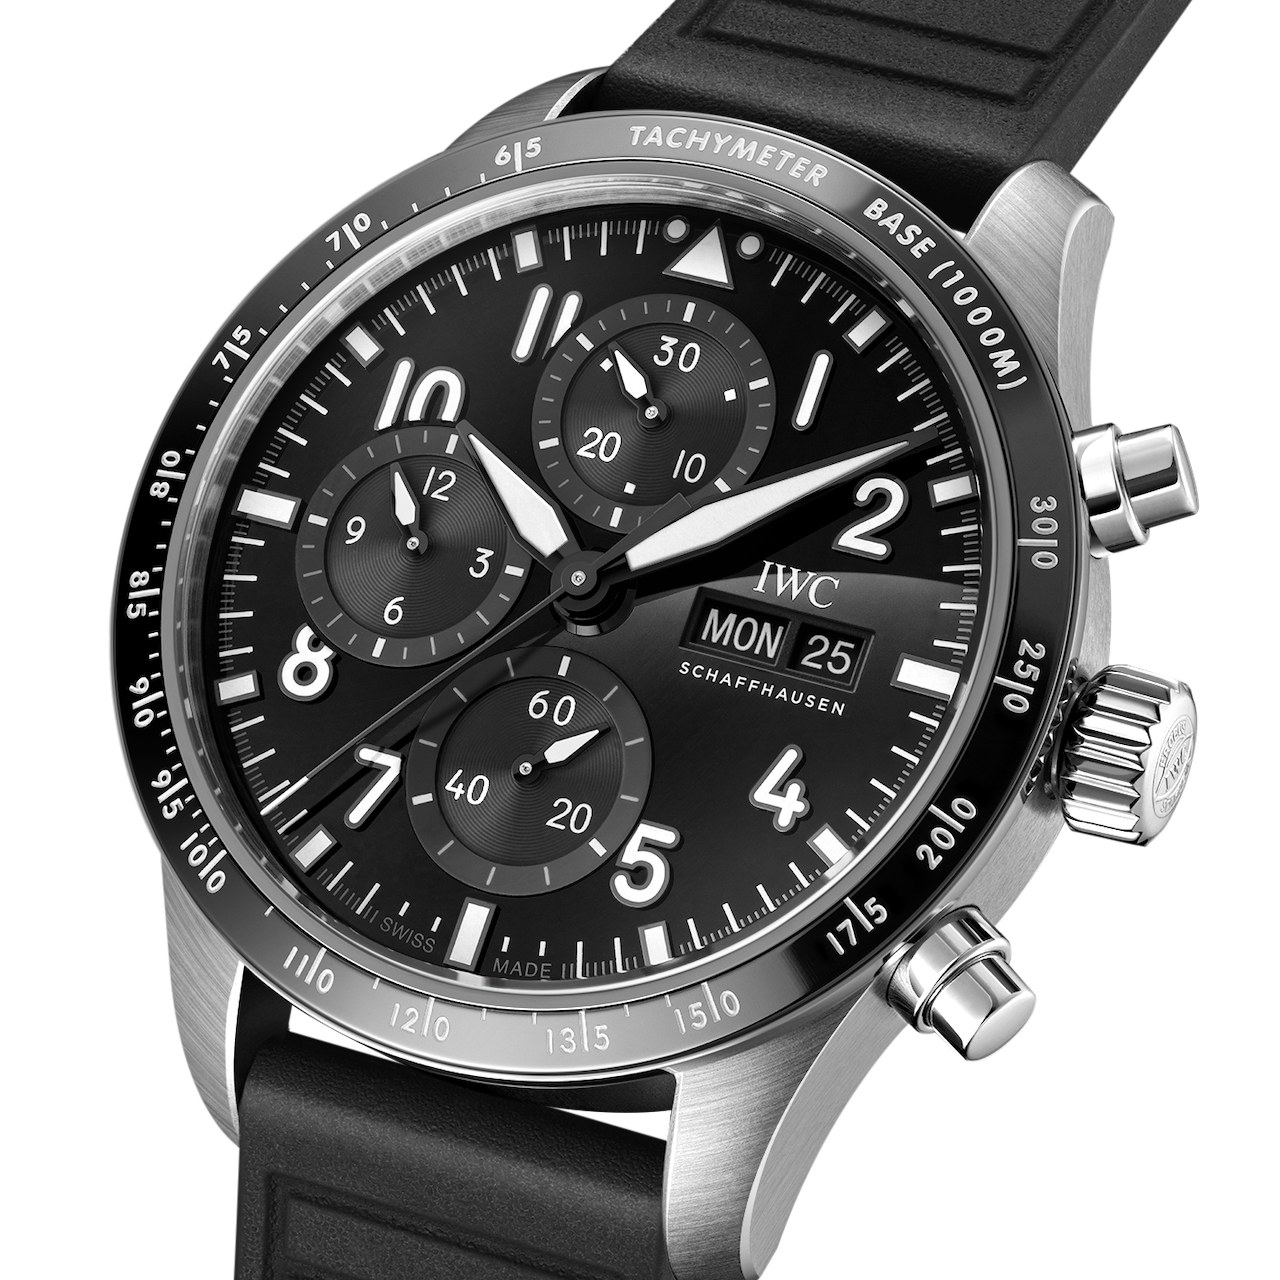 Watchmaker IWC Schaffhausen has released two performance chronographs dedicated to its motorsport partners Mercedes-AMG and the Mercedes-AMG PETRONAS Formula One Team.